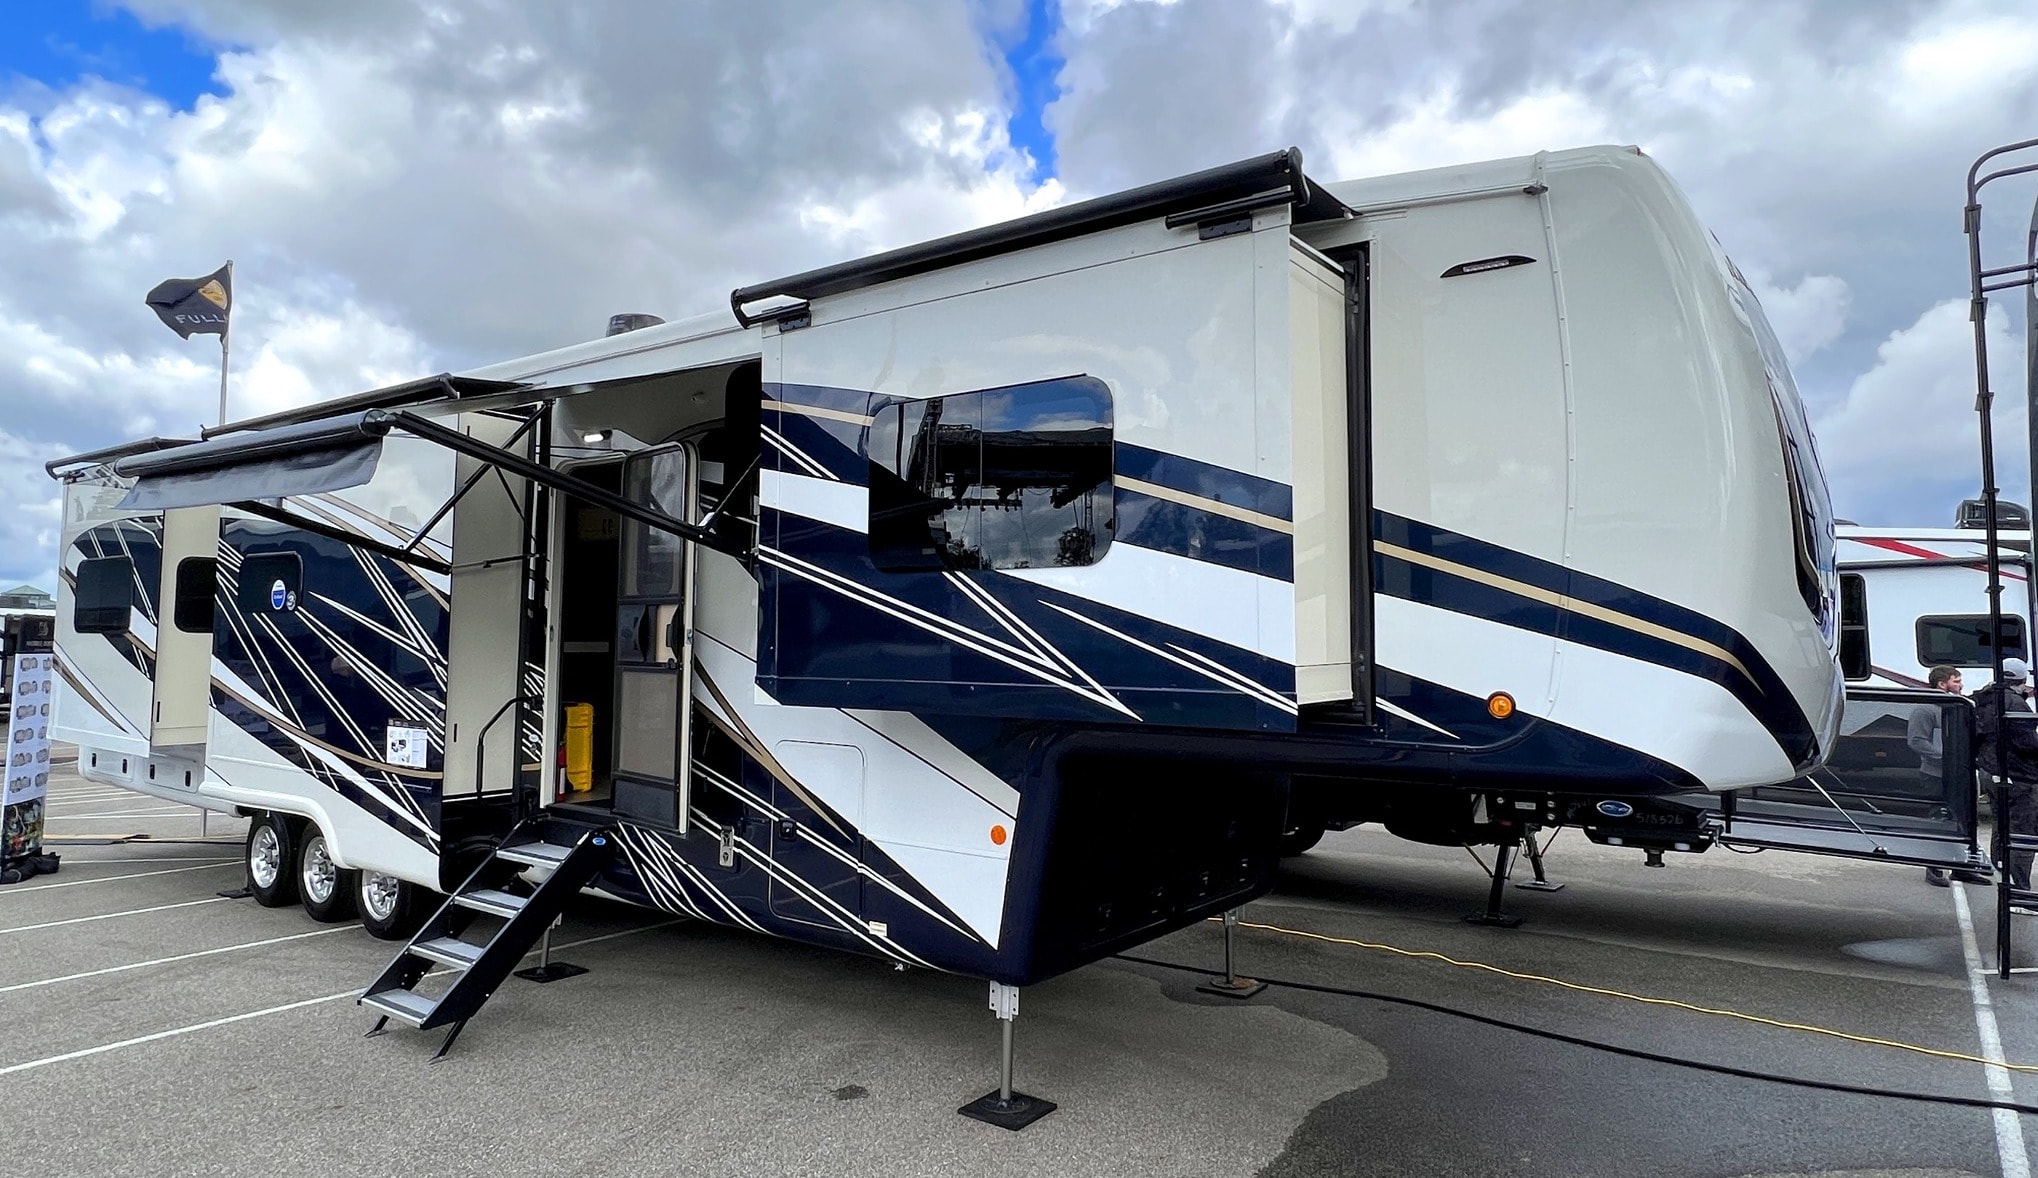 Drv S 2023 Orlando Is A Mobile Suite Built For The Finest Living Shows Off A Flex Room 205520 1 